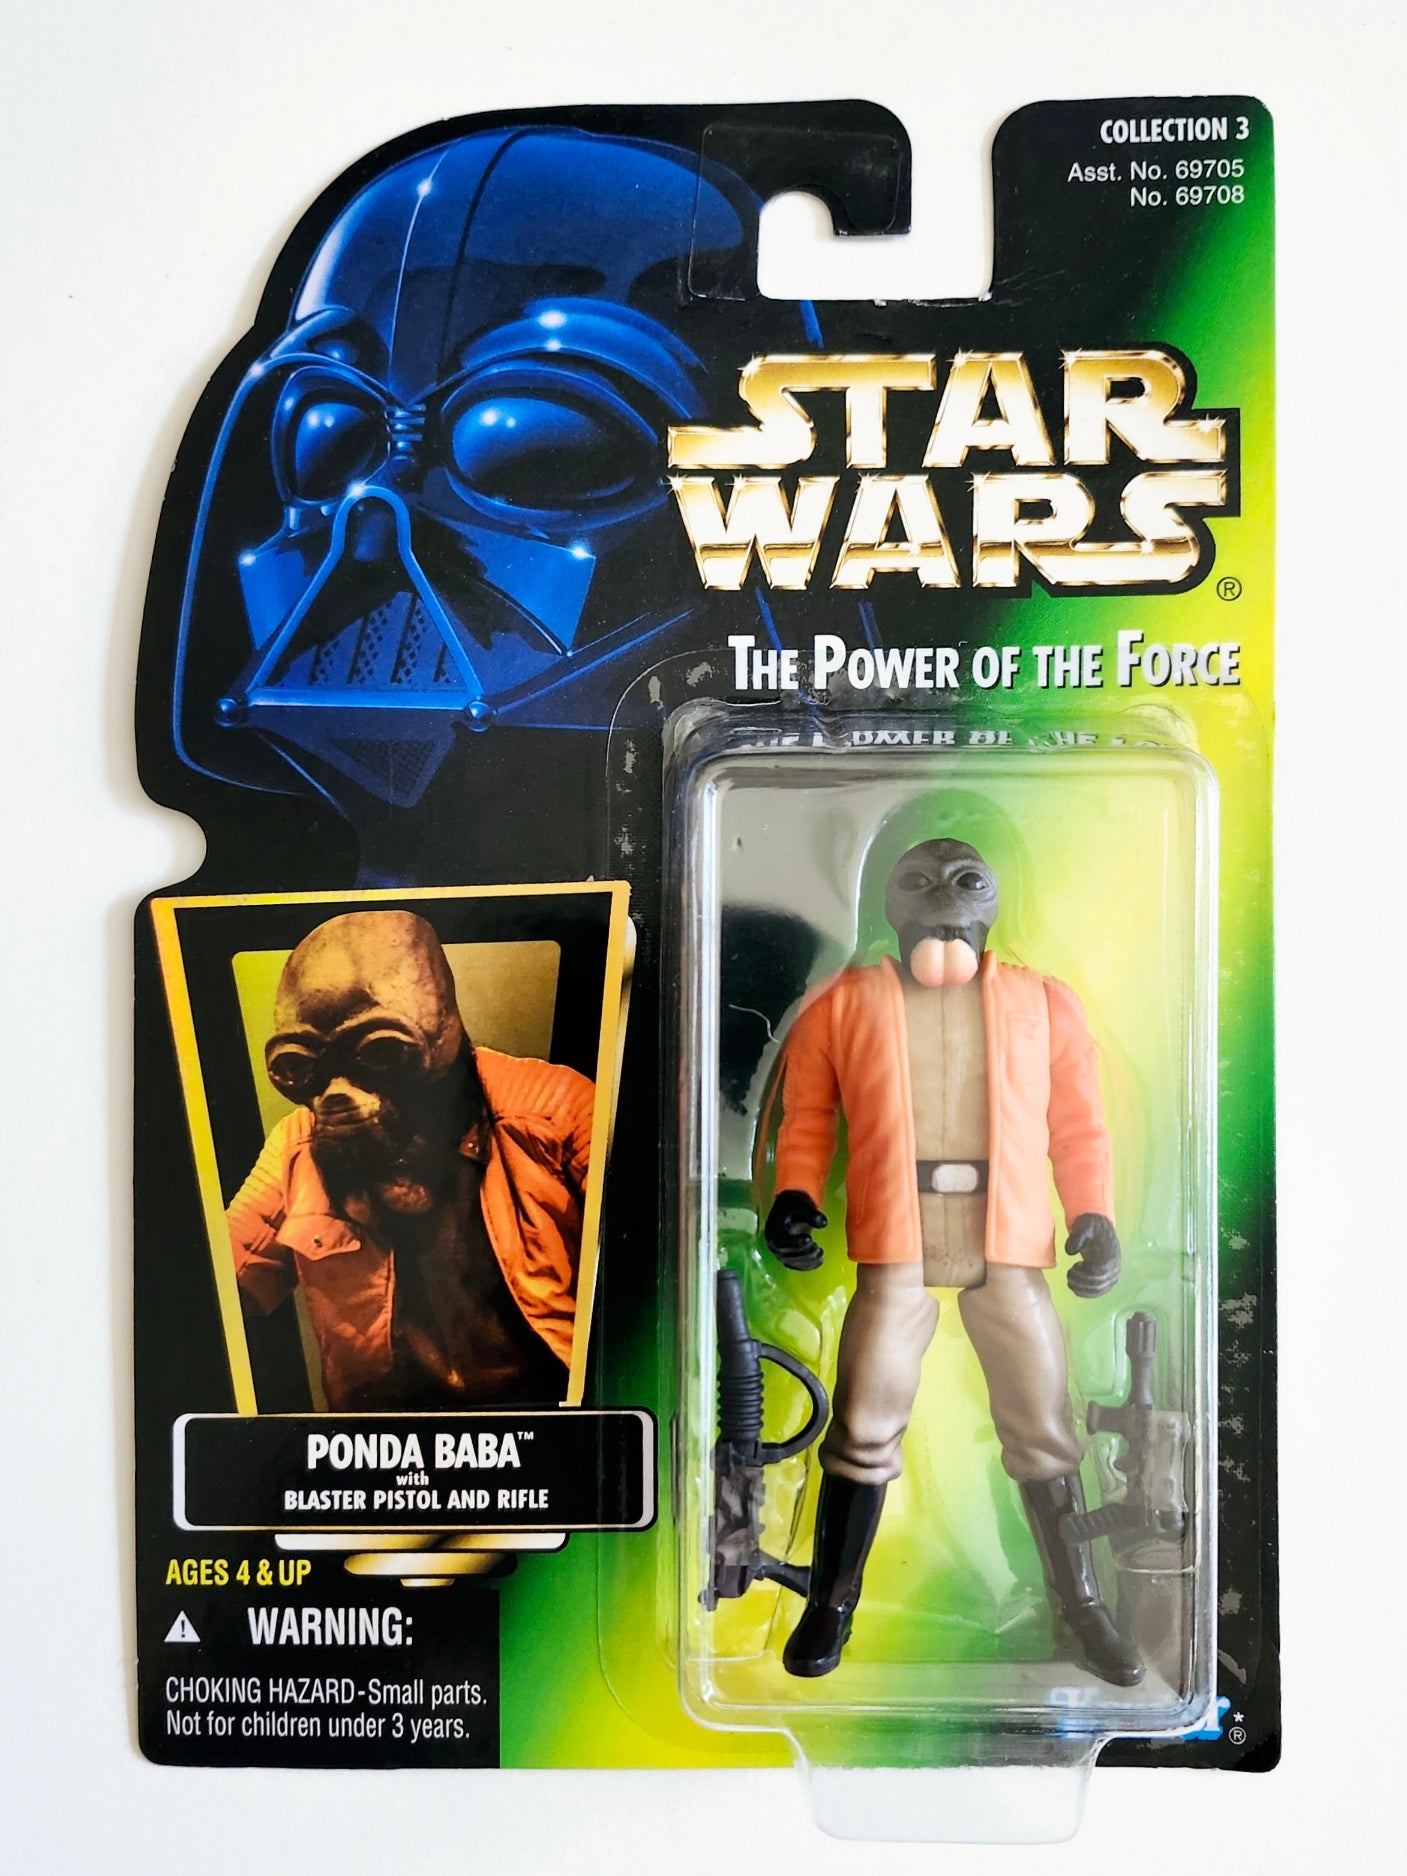 Star Wars: Power of the Force Ponda Baba (Hologram Card) 3.75-Inch Action Figure